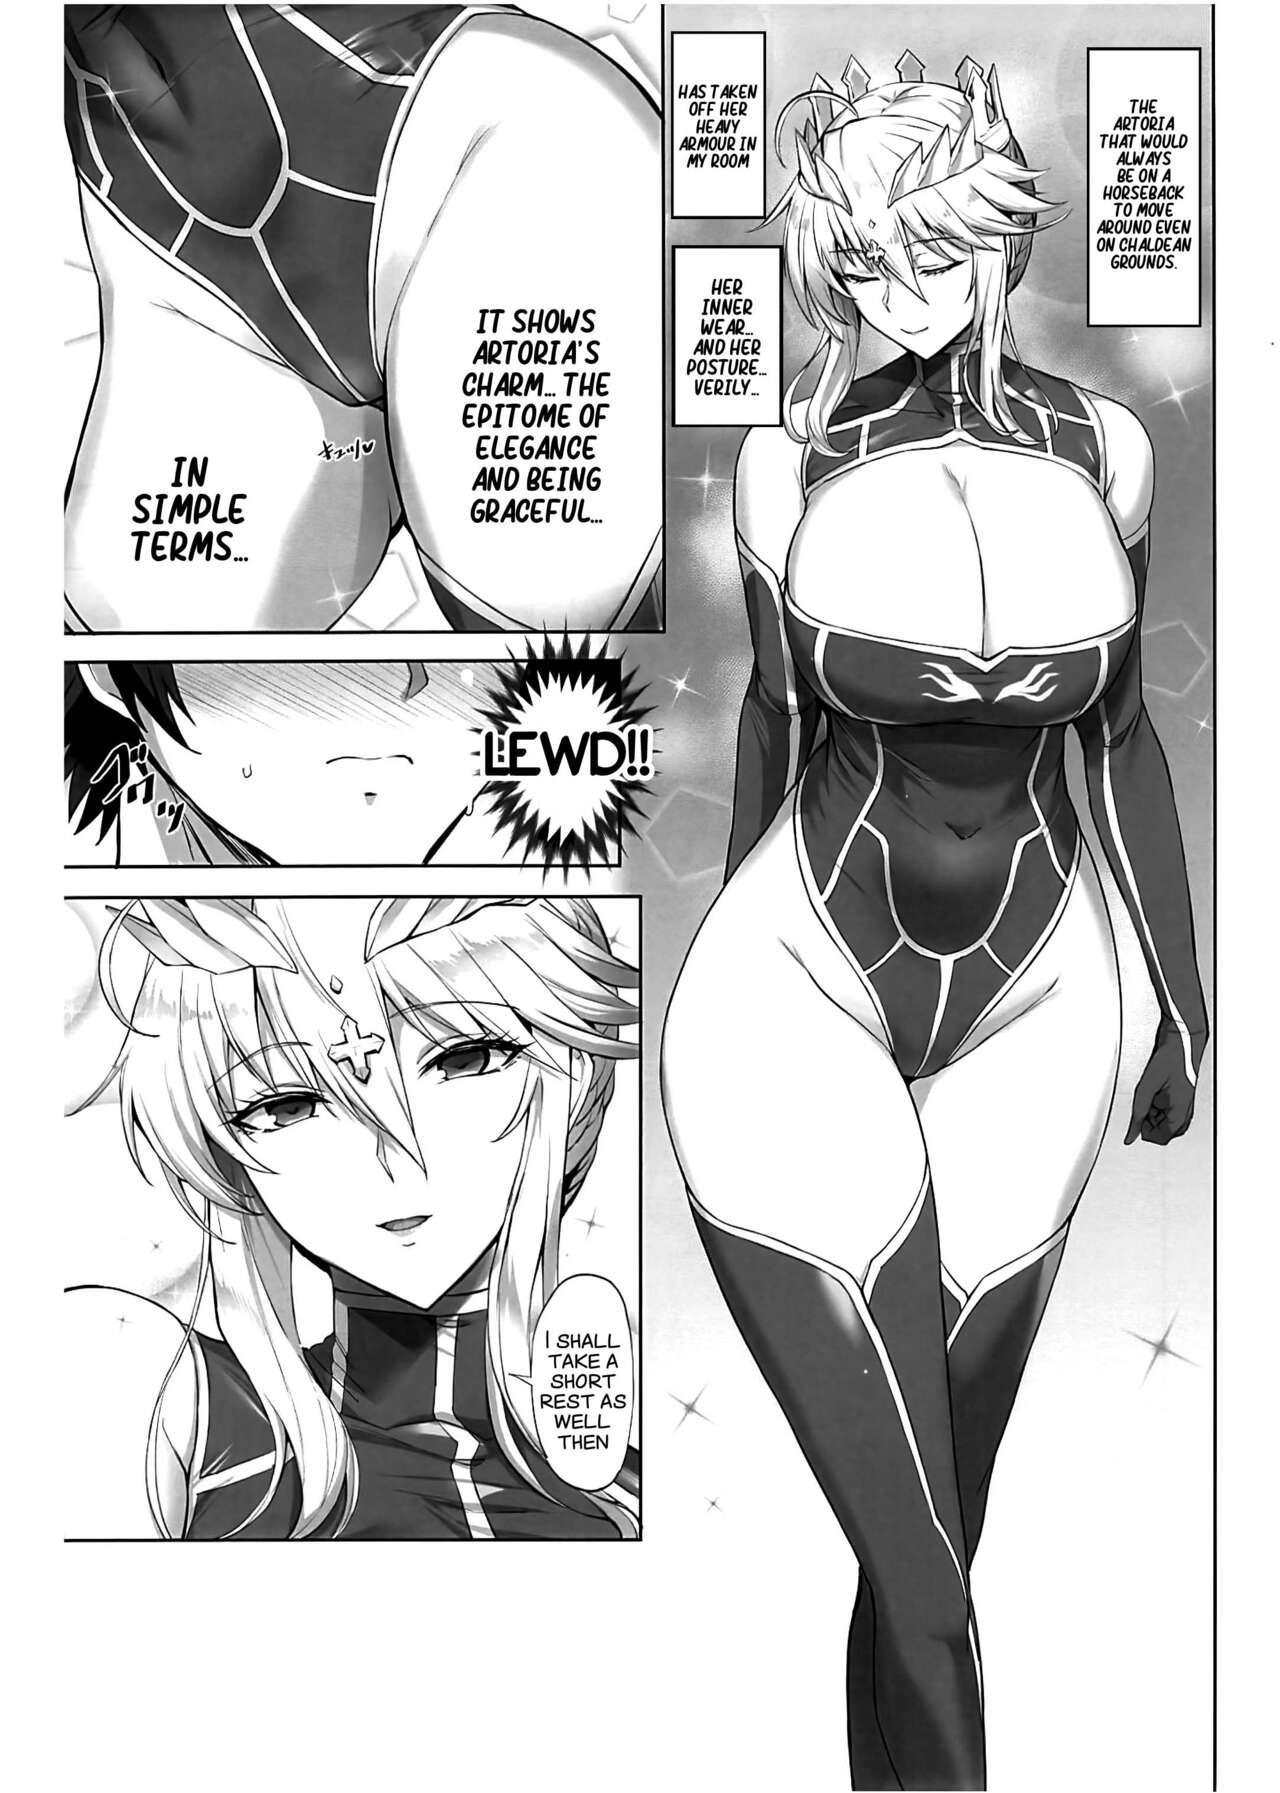 Old Young Chichiue Daisuki - my king my life - Fate grand order Femdom Pov - Page 4